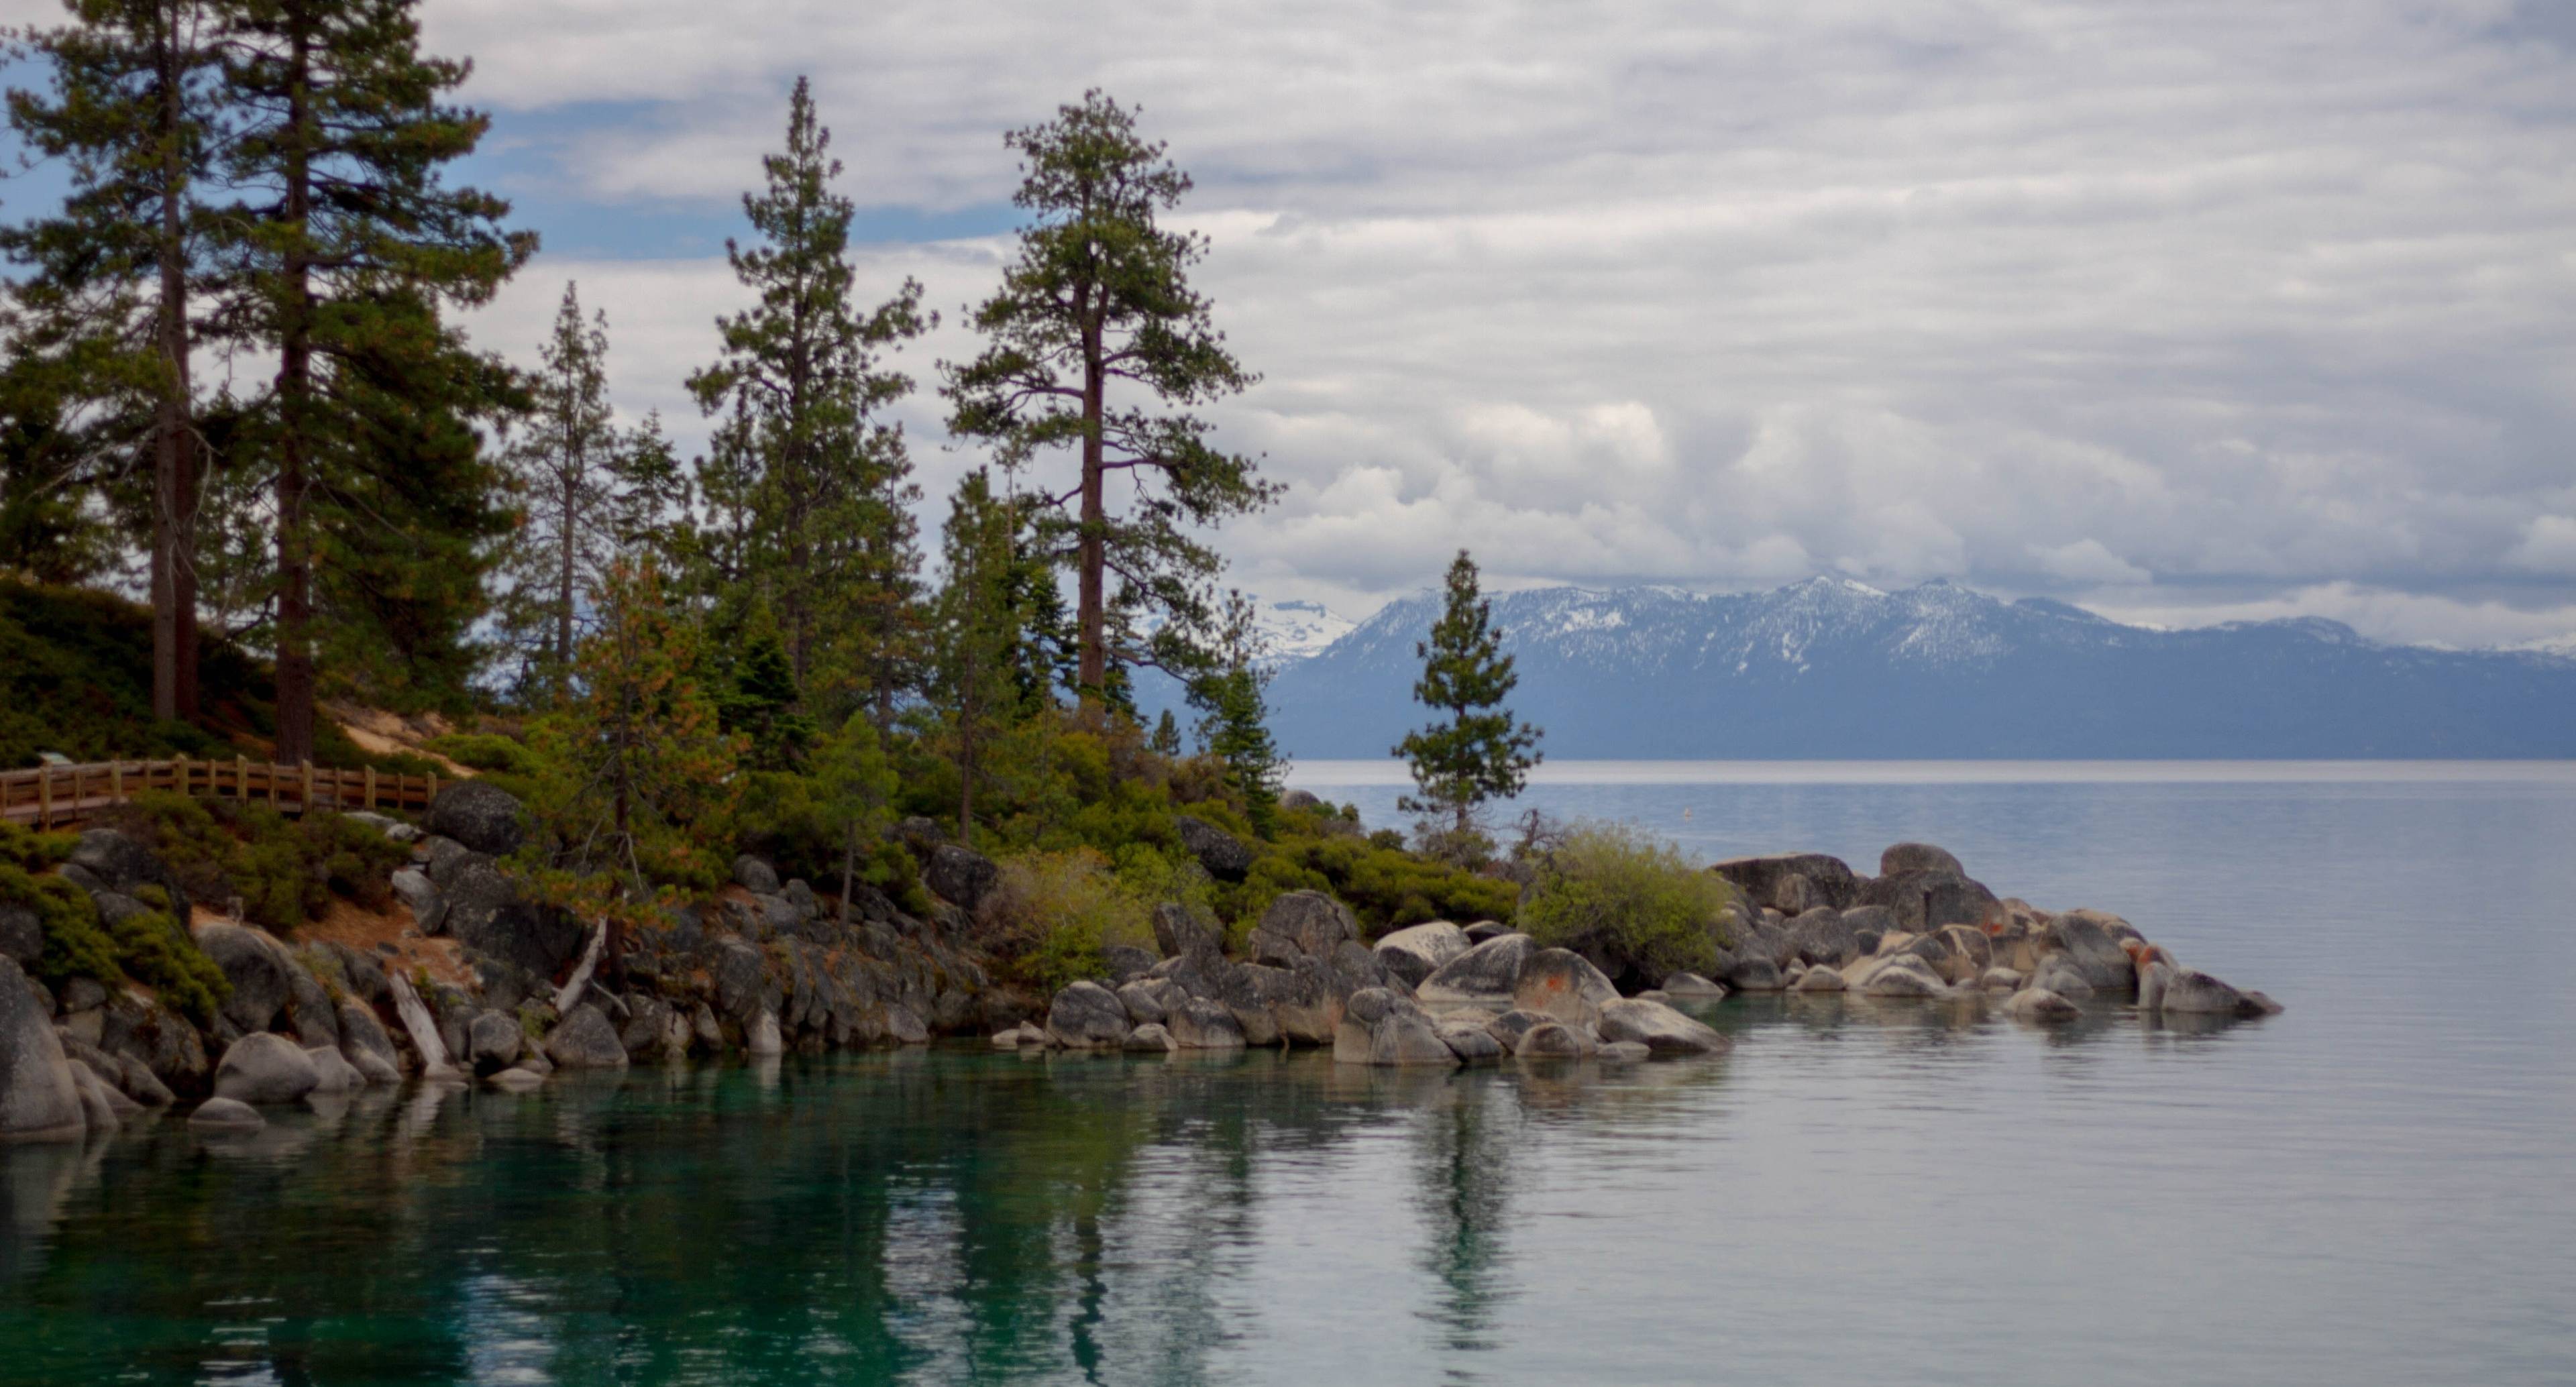 Hiking and Swimming in the Blue Waters of Lake Tahoe